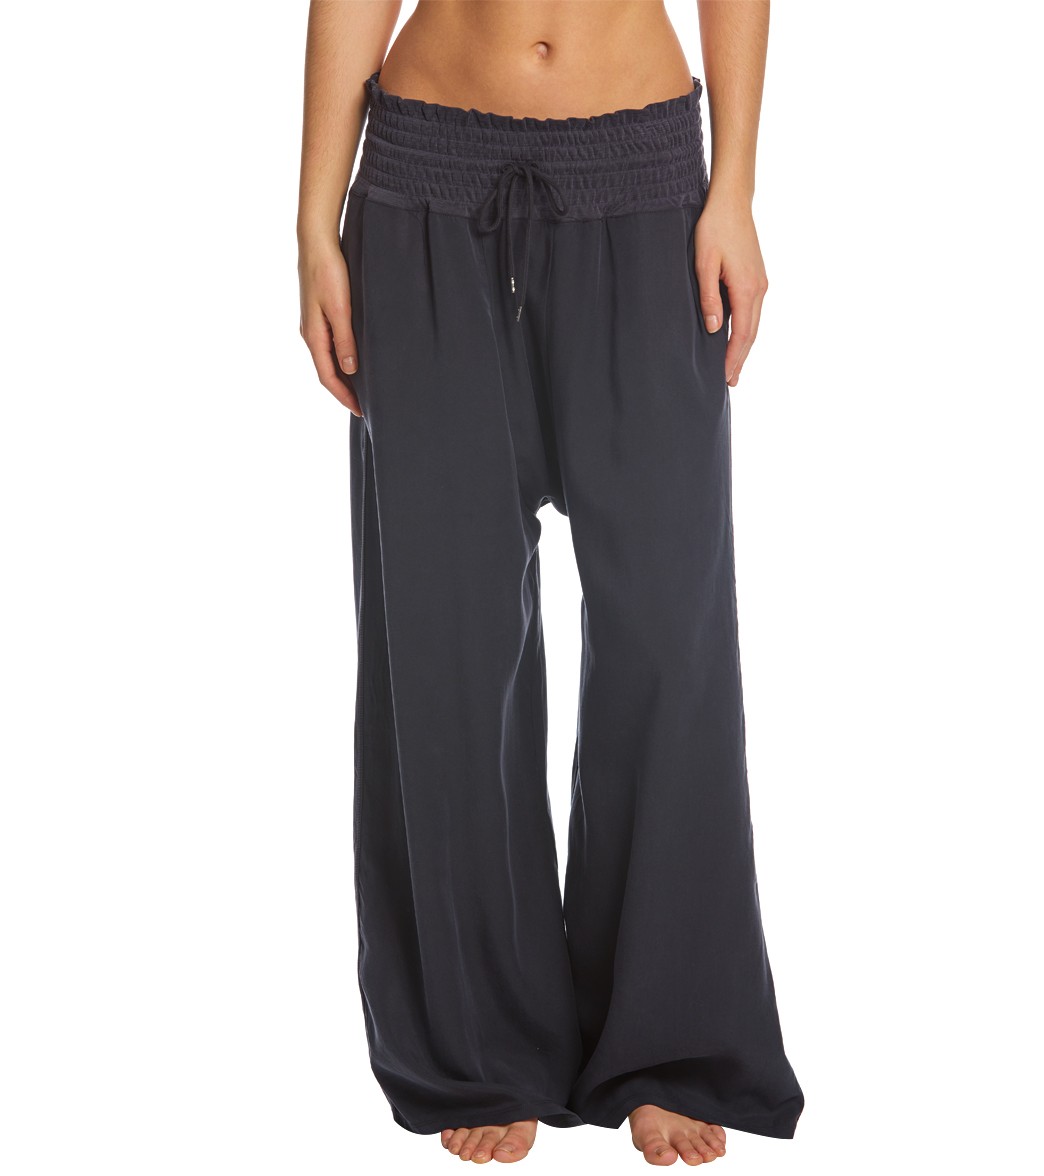 Free People Movement Mia Lounge Pants at SwimOutlet.com - Free Shipping